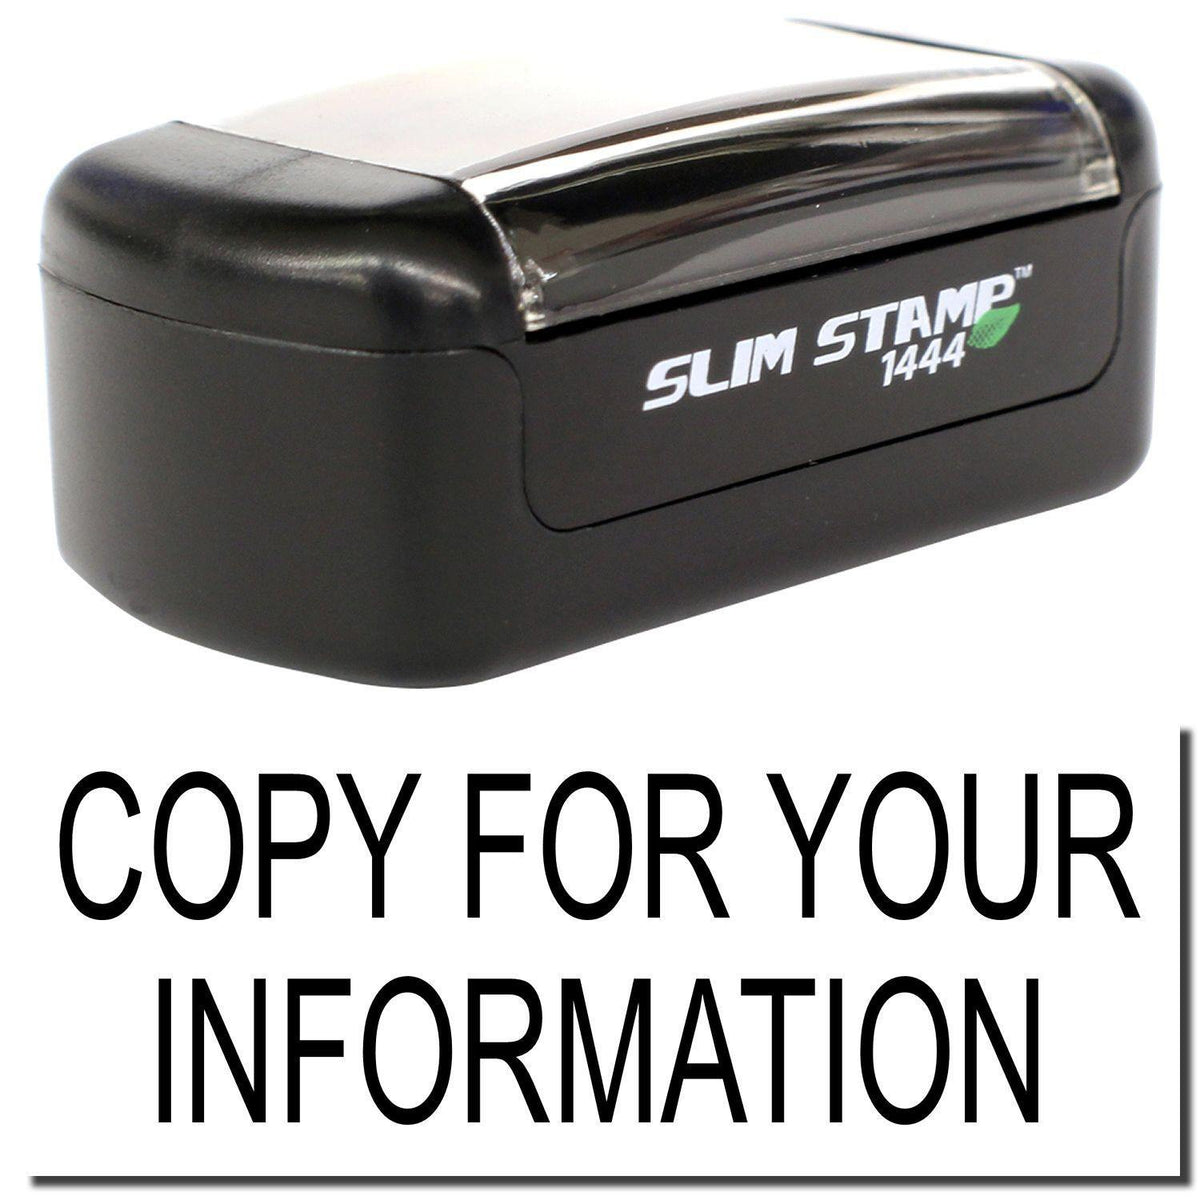 A stock office pre-inked stamp with a stamped image showing how the text &quot;COPY FOR YOUR INFORMATION&quot; is displayed after stamping.